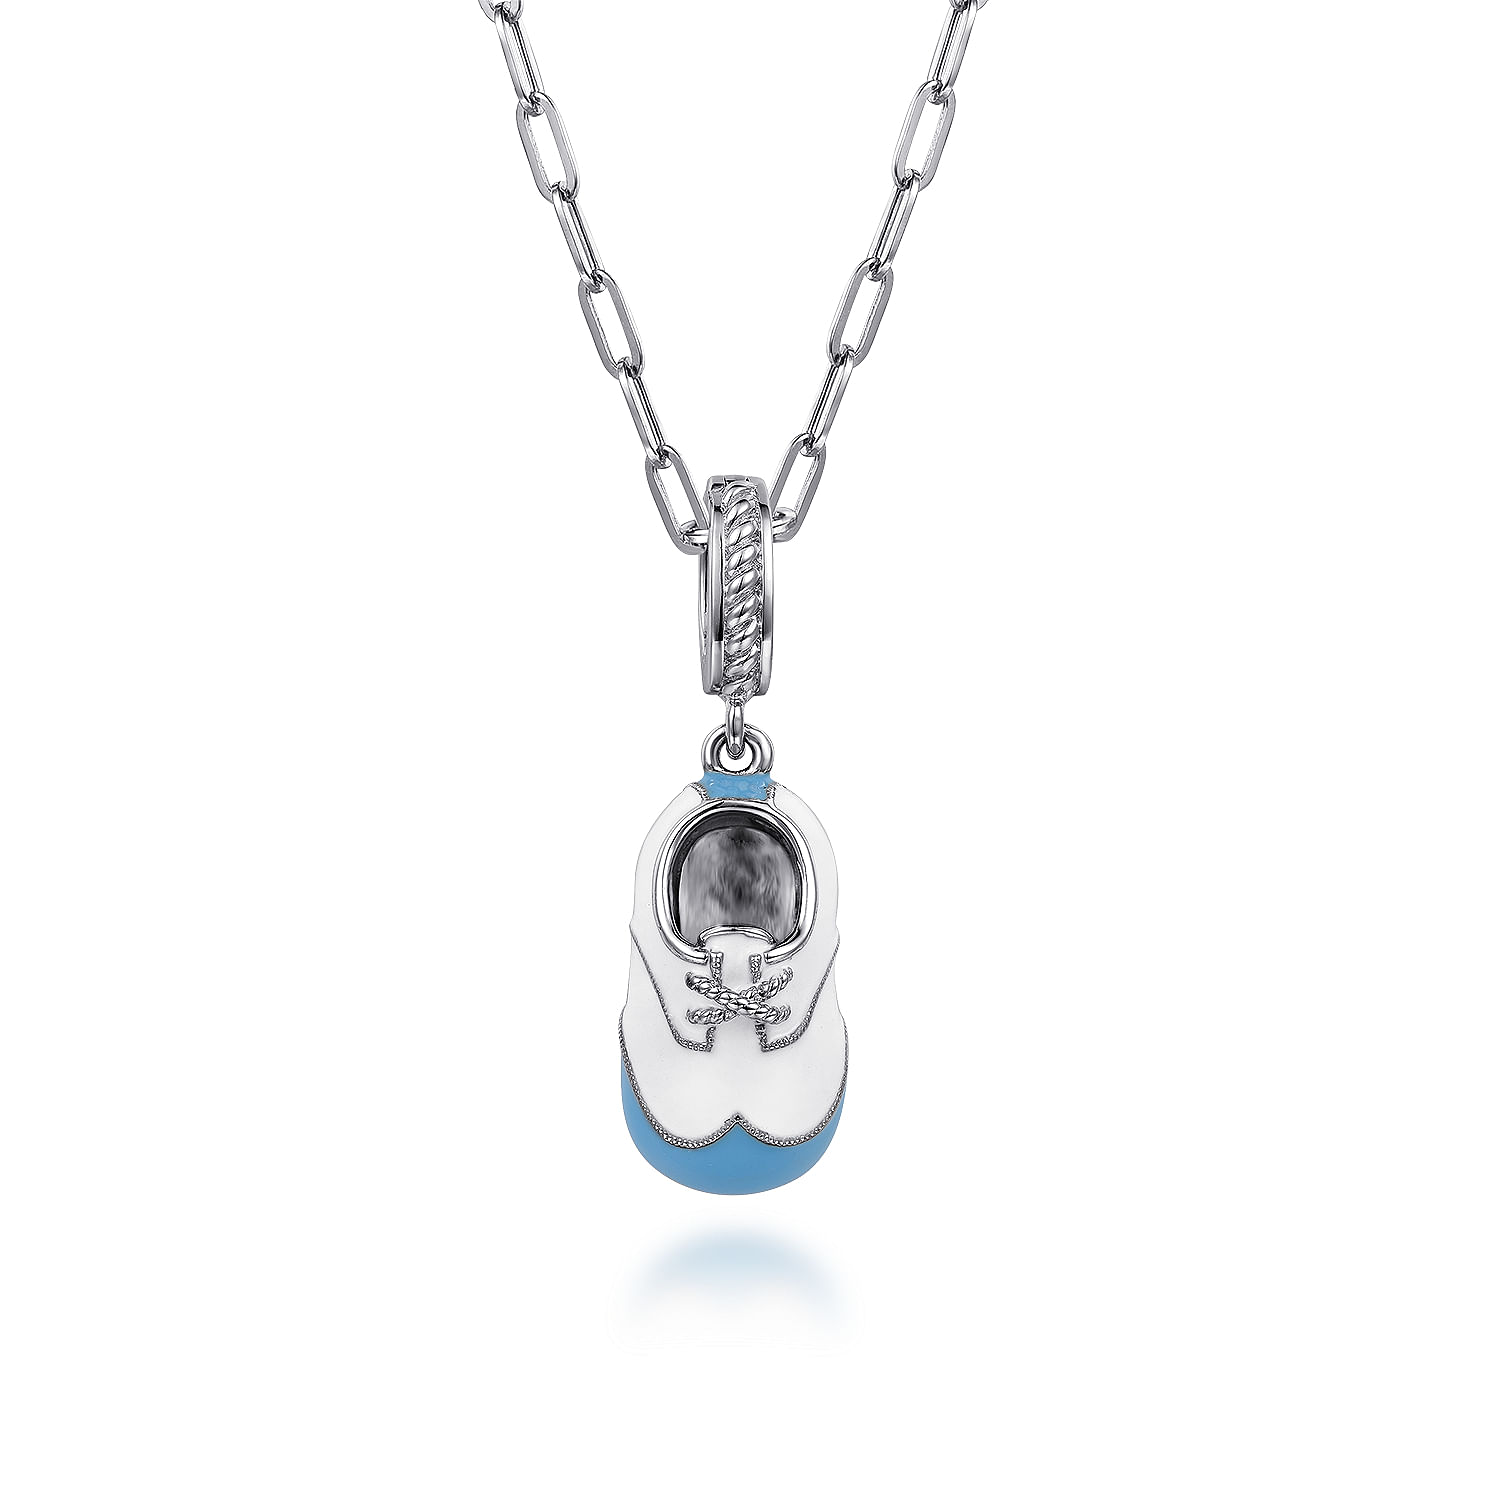 925 Sterling Silver Blue and Ivory Enamel Baby Shoe Charm Pendant